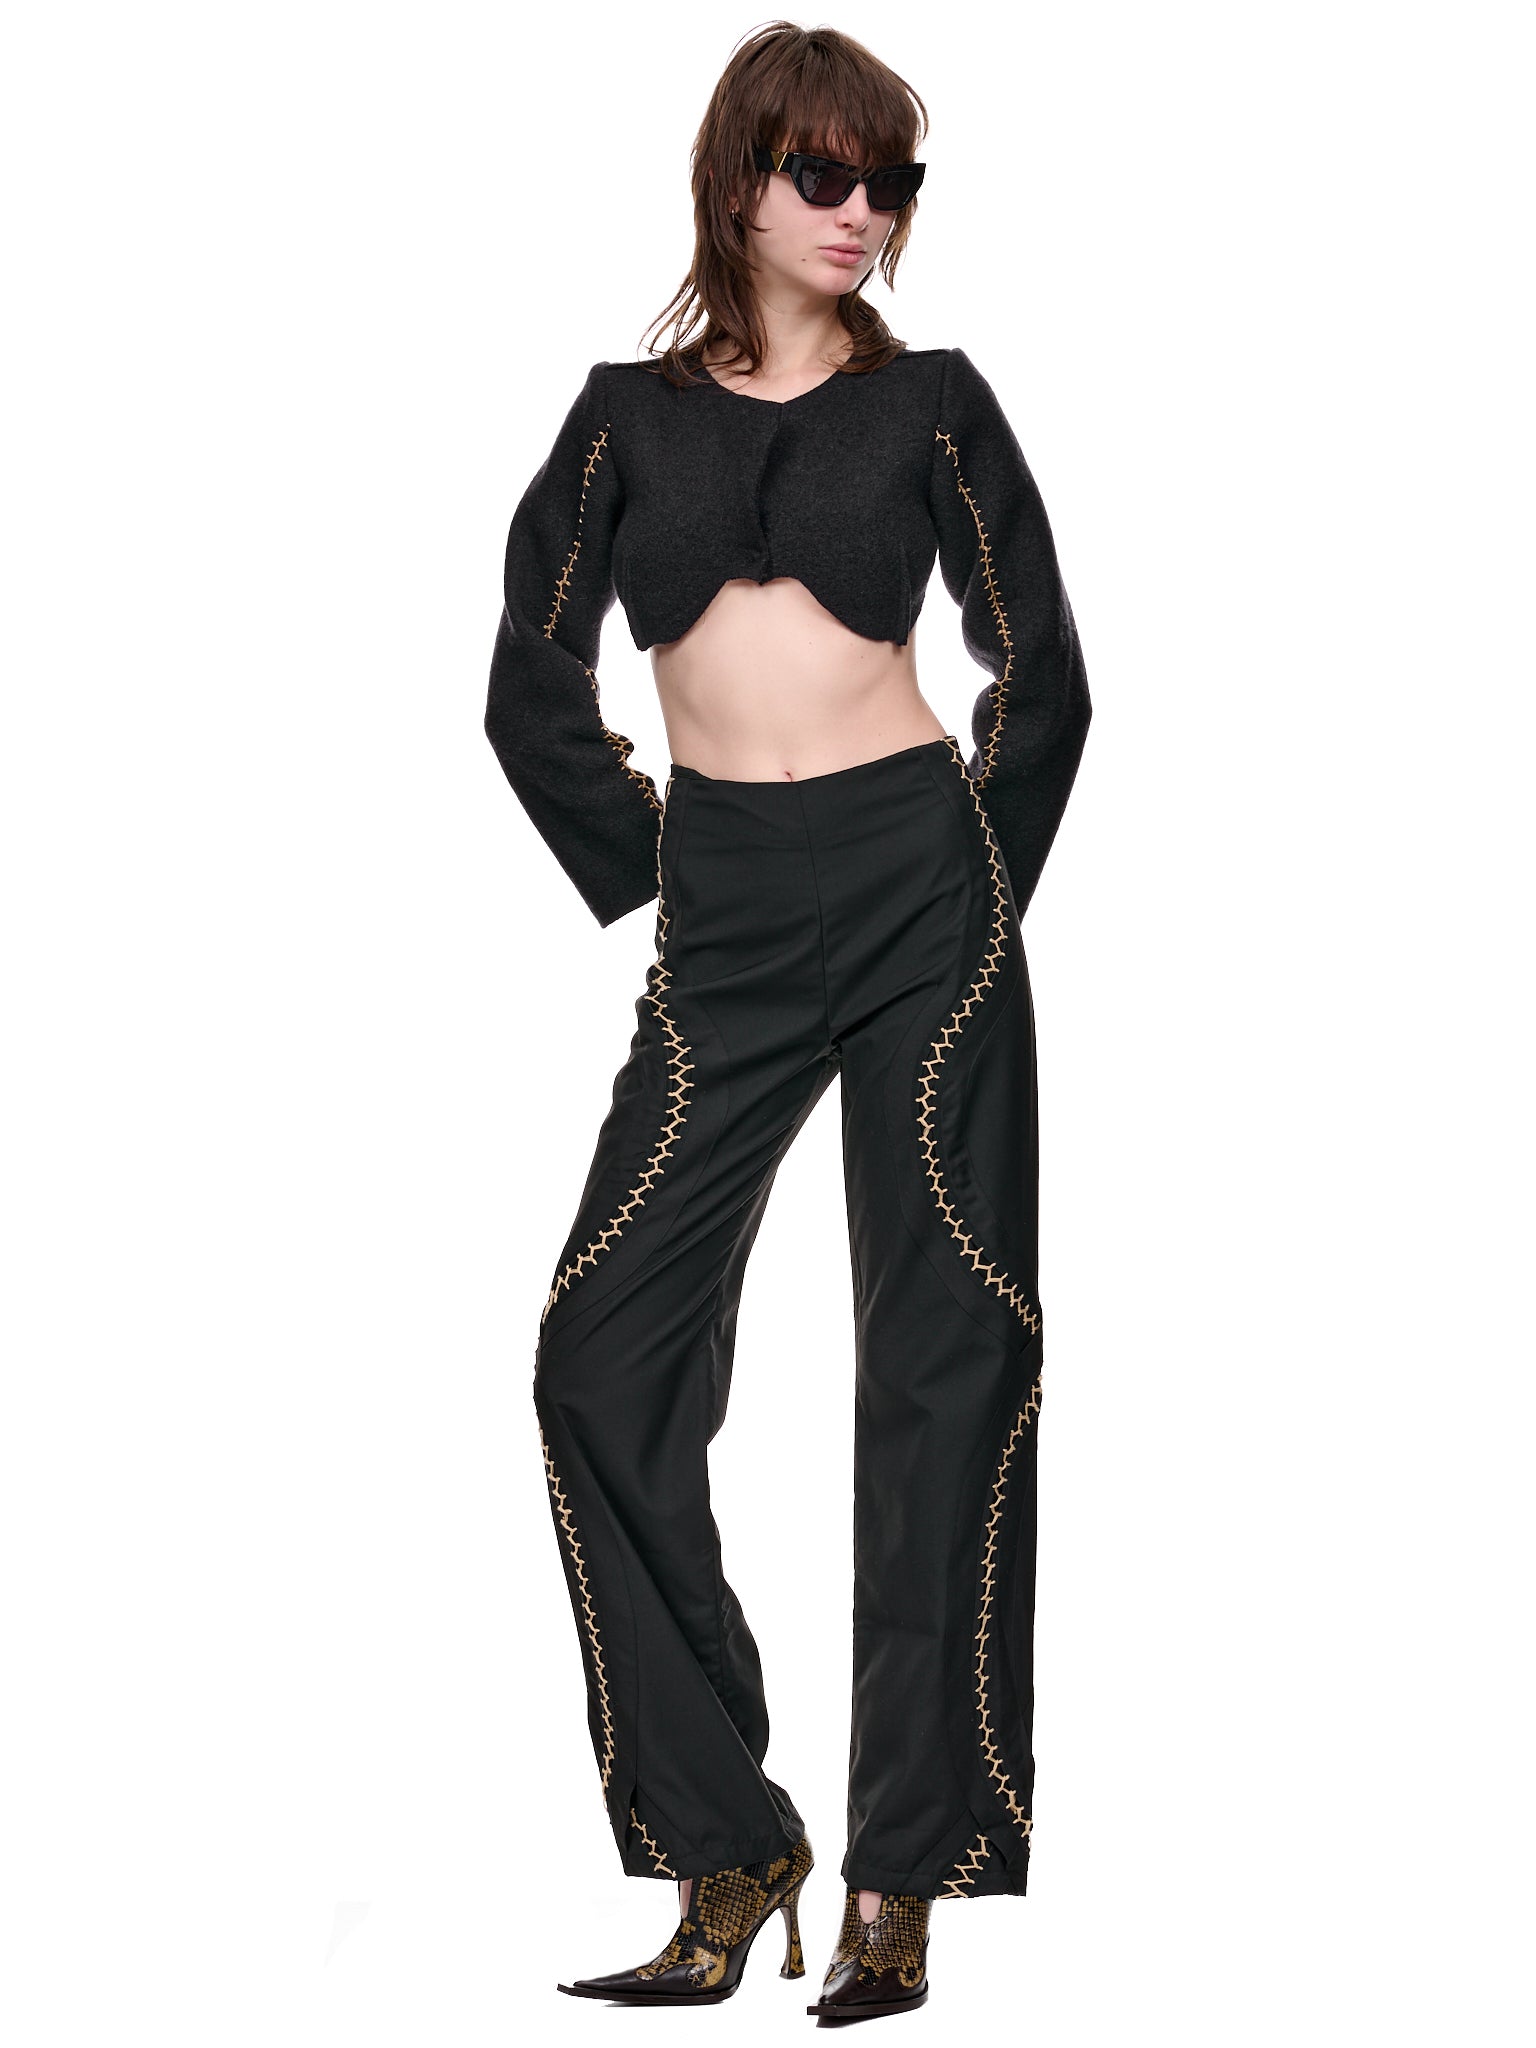 Double Helix Trousers (DOUBLE-HELIX-BLACK-BROWN-RIBBO)